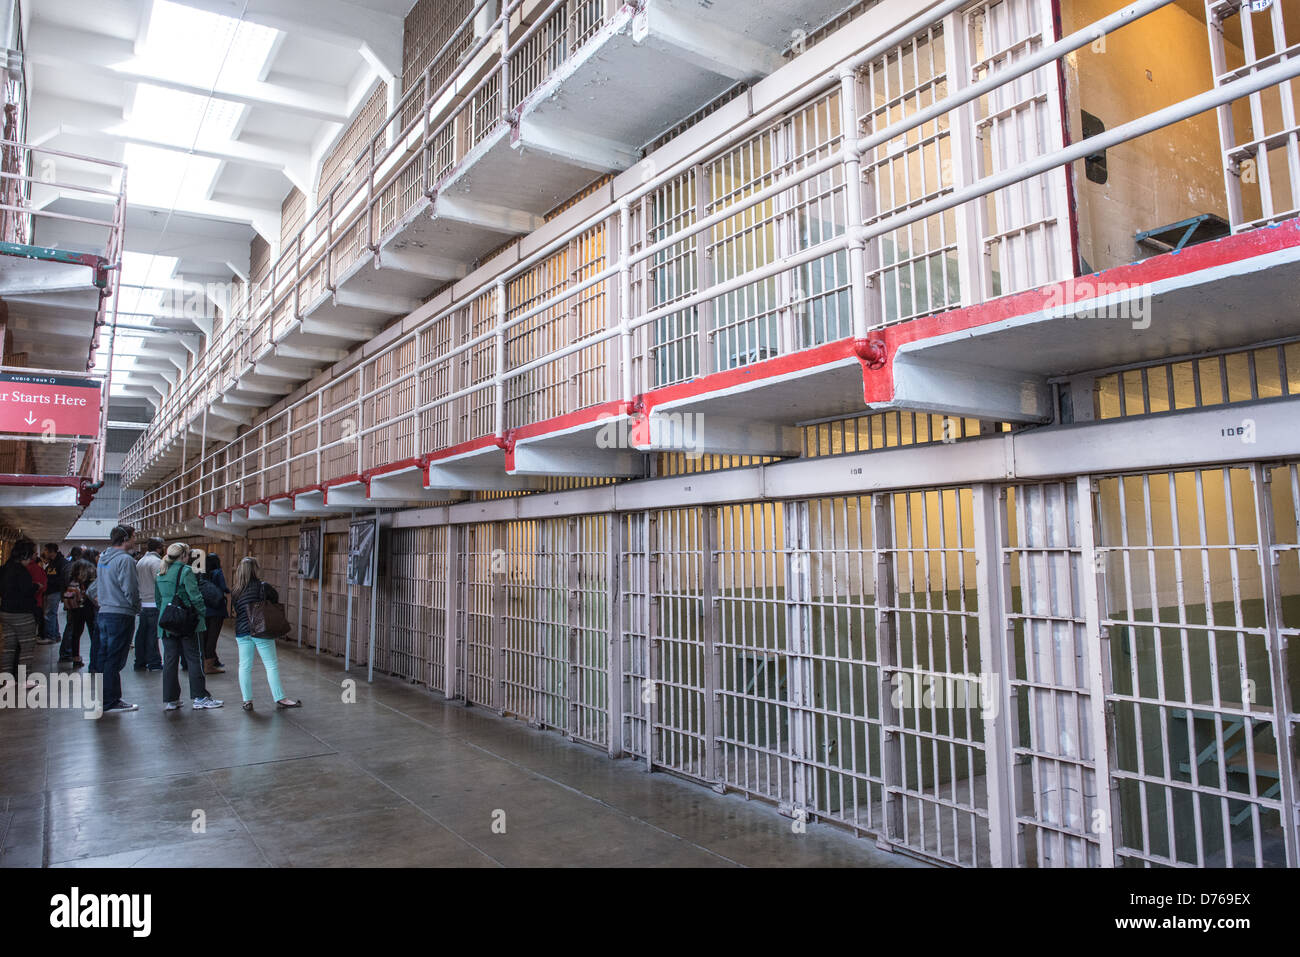 SAN FRANCISCO, California - Inside the cell block where the inmate's cells  were in Alcatraz prison on Alcatraz Island in San Francisco Bay Stock Photo  - Alamy